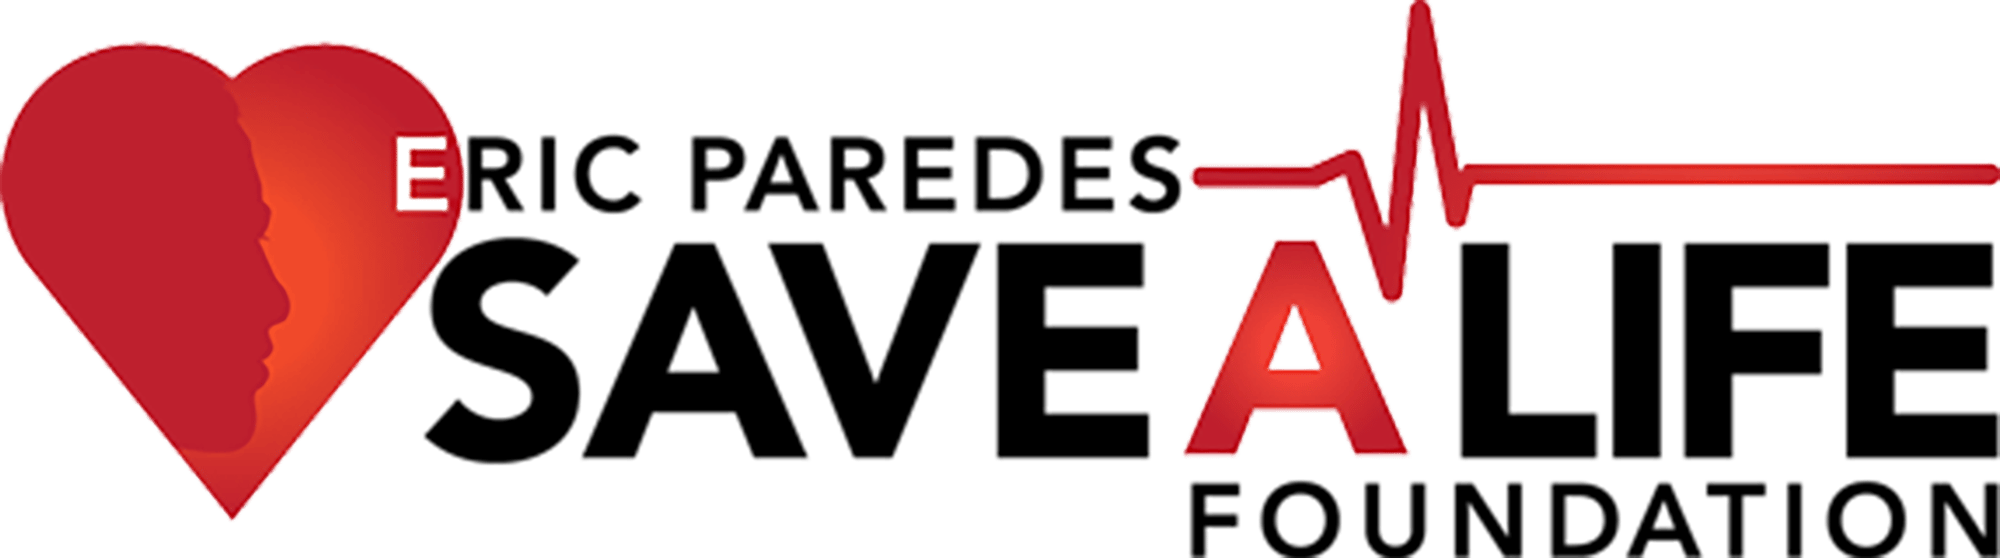 Eric Paredes Save a Life Foundation 2